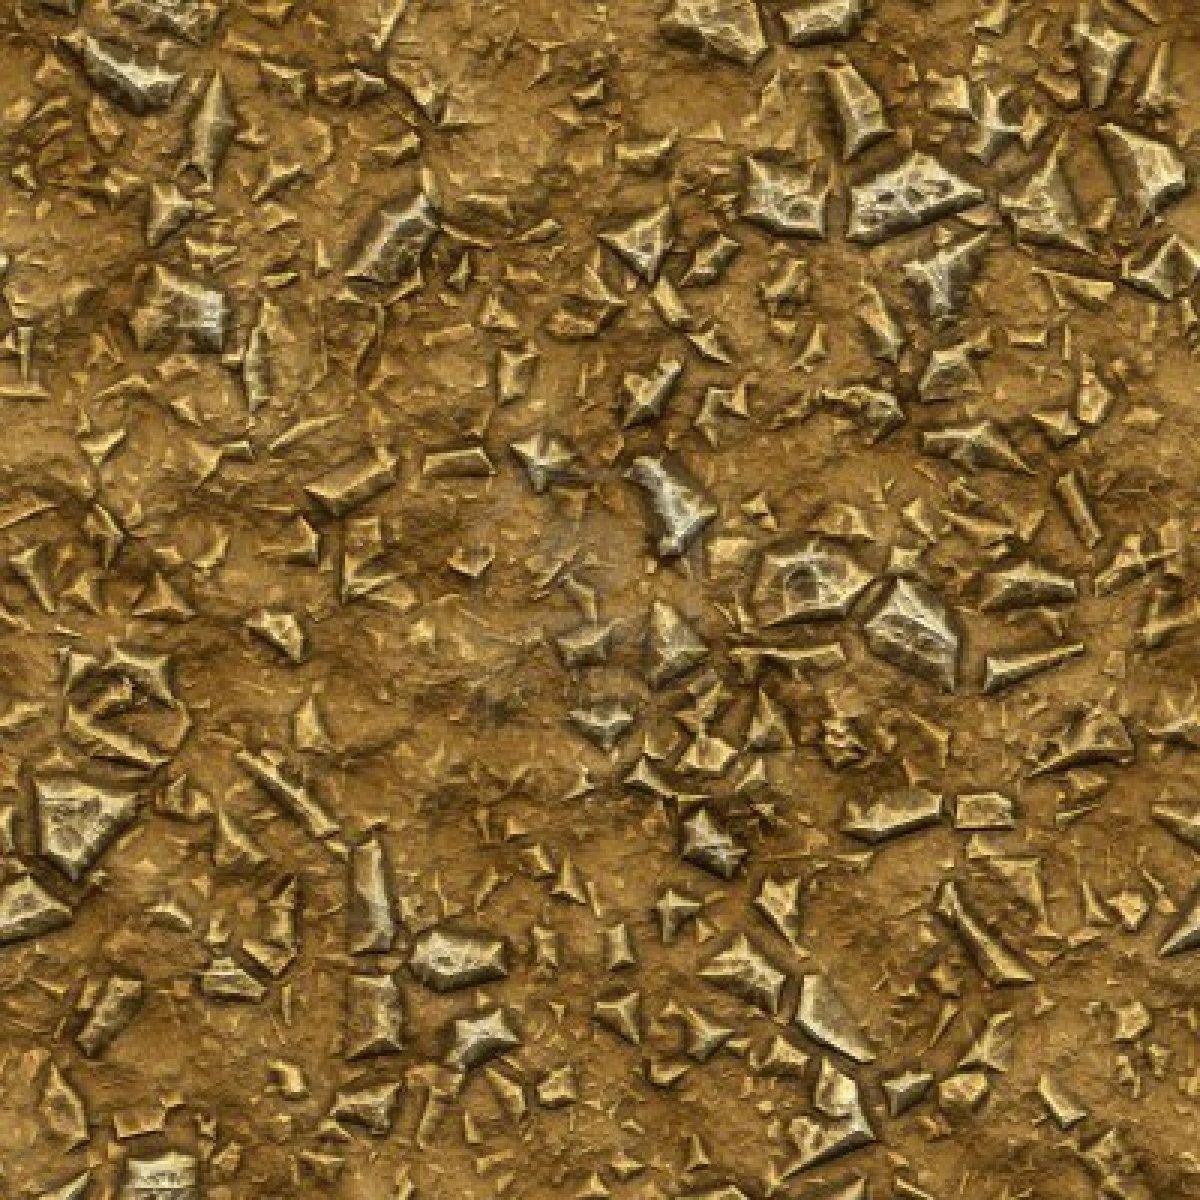 Collected Wallpaper:. image of dirt and rocks for an